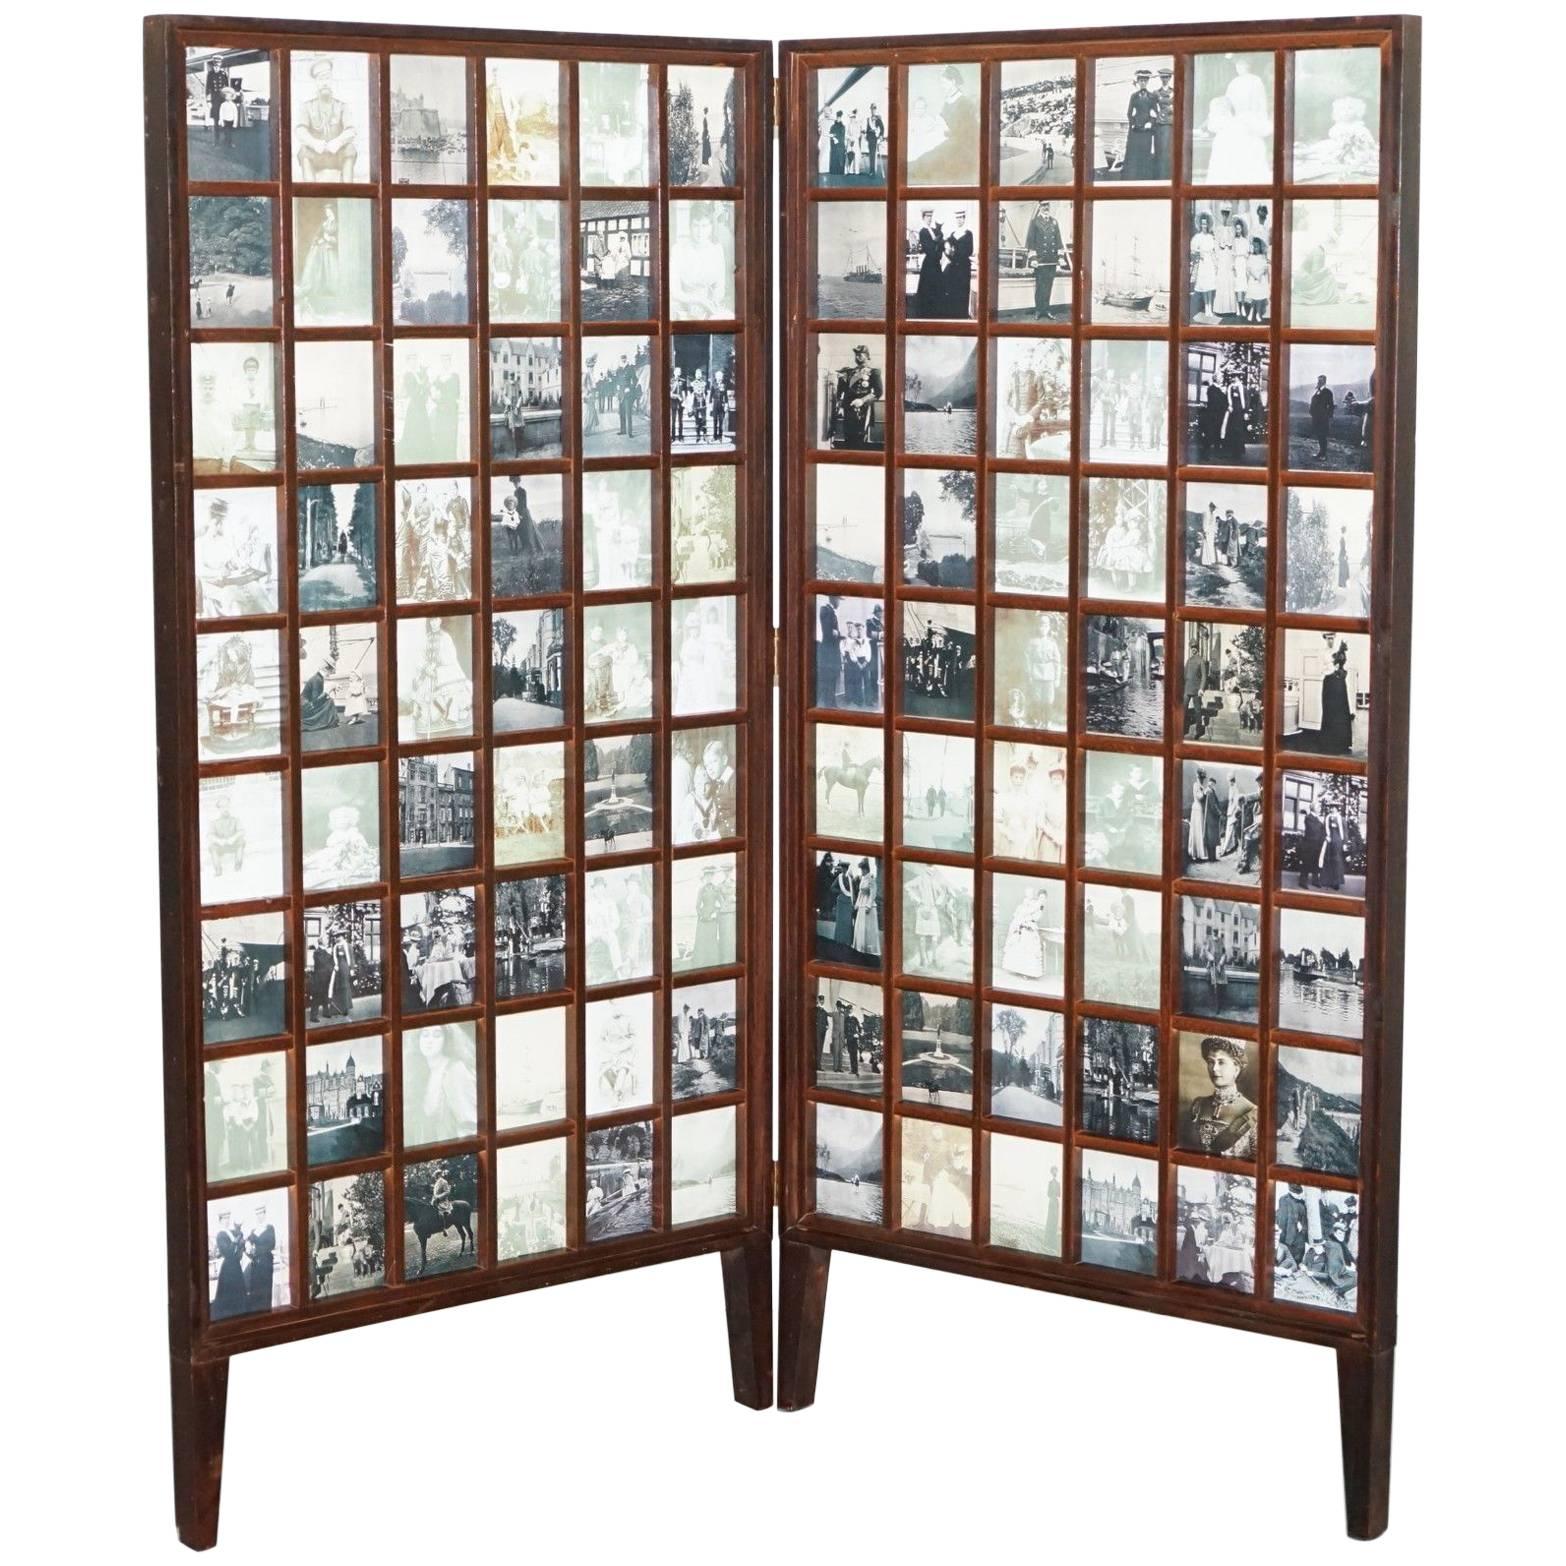 Beech Wood Folding Screen Room Divider Victorian Pictures Royal Military Empire